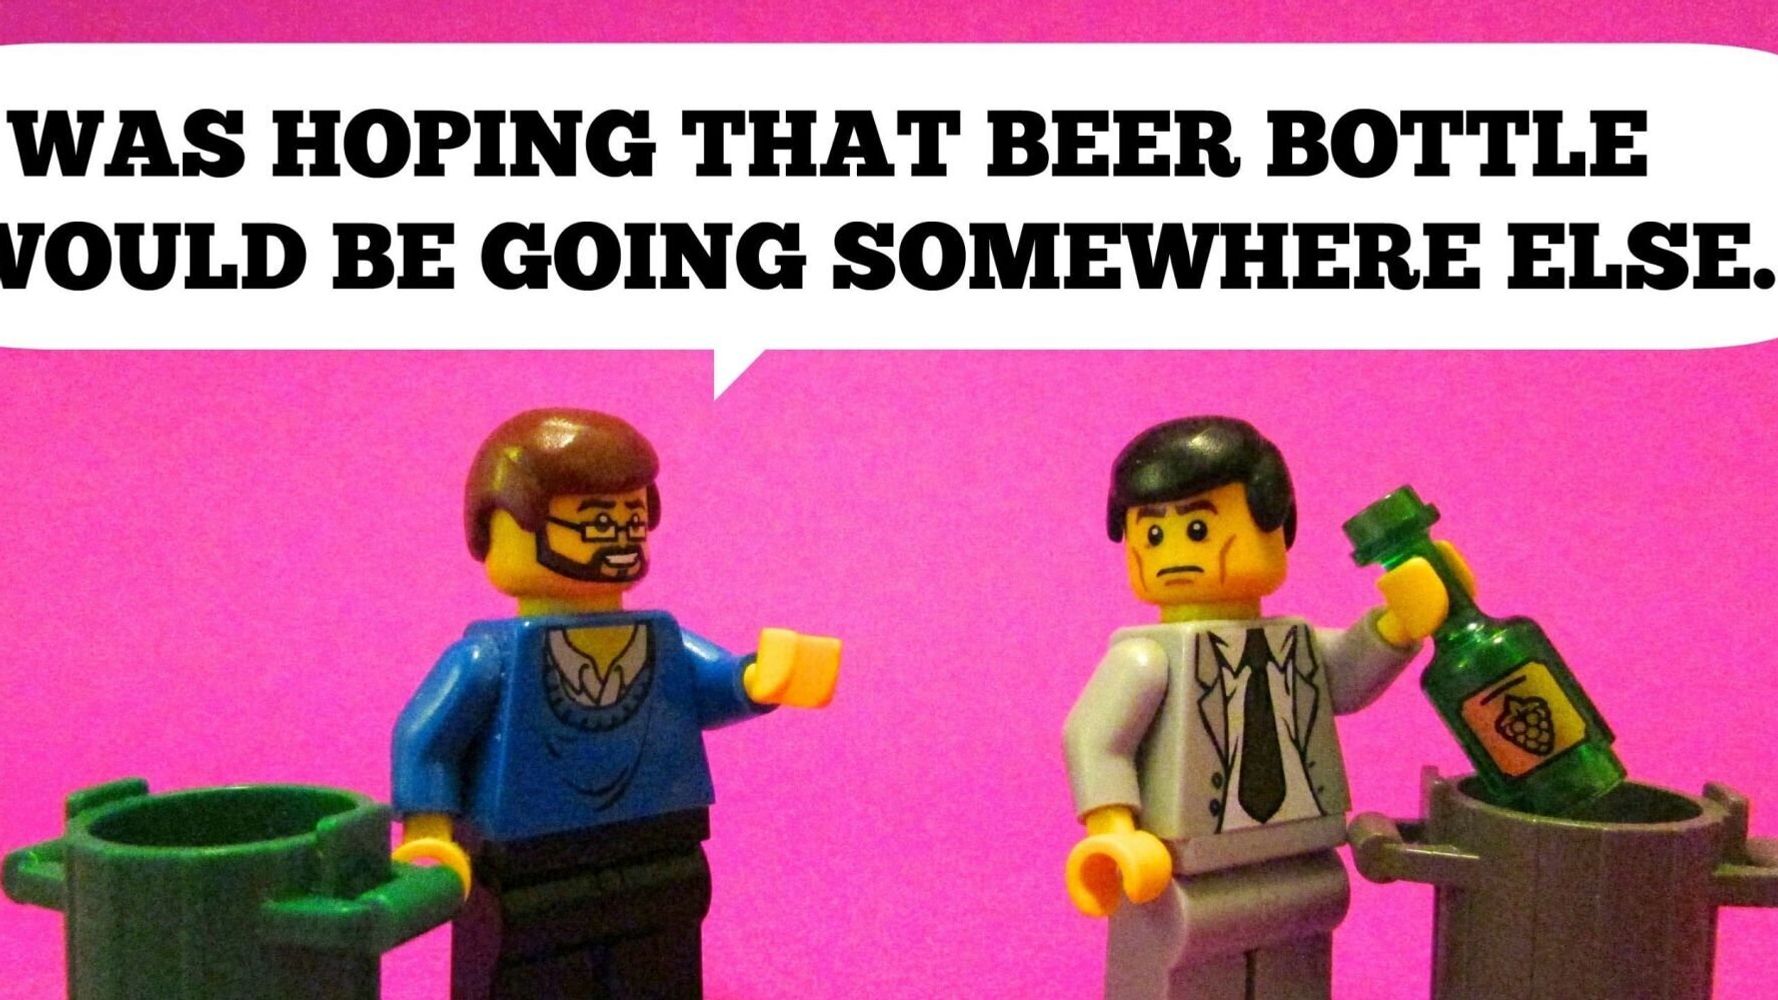 Lego Porn Toys - Porn Comments Illustrated With Lego | HuffPost UK Comedy